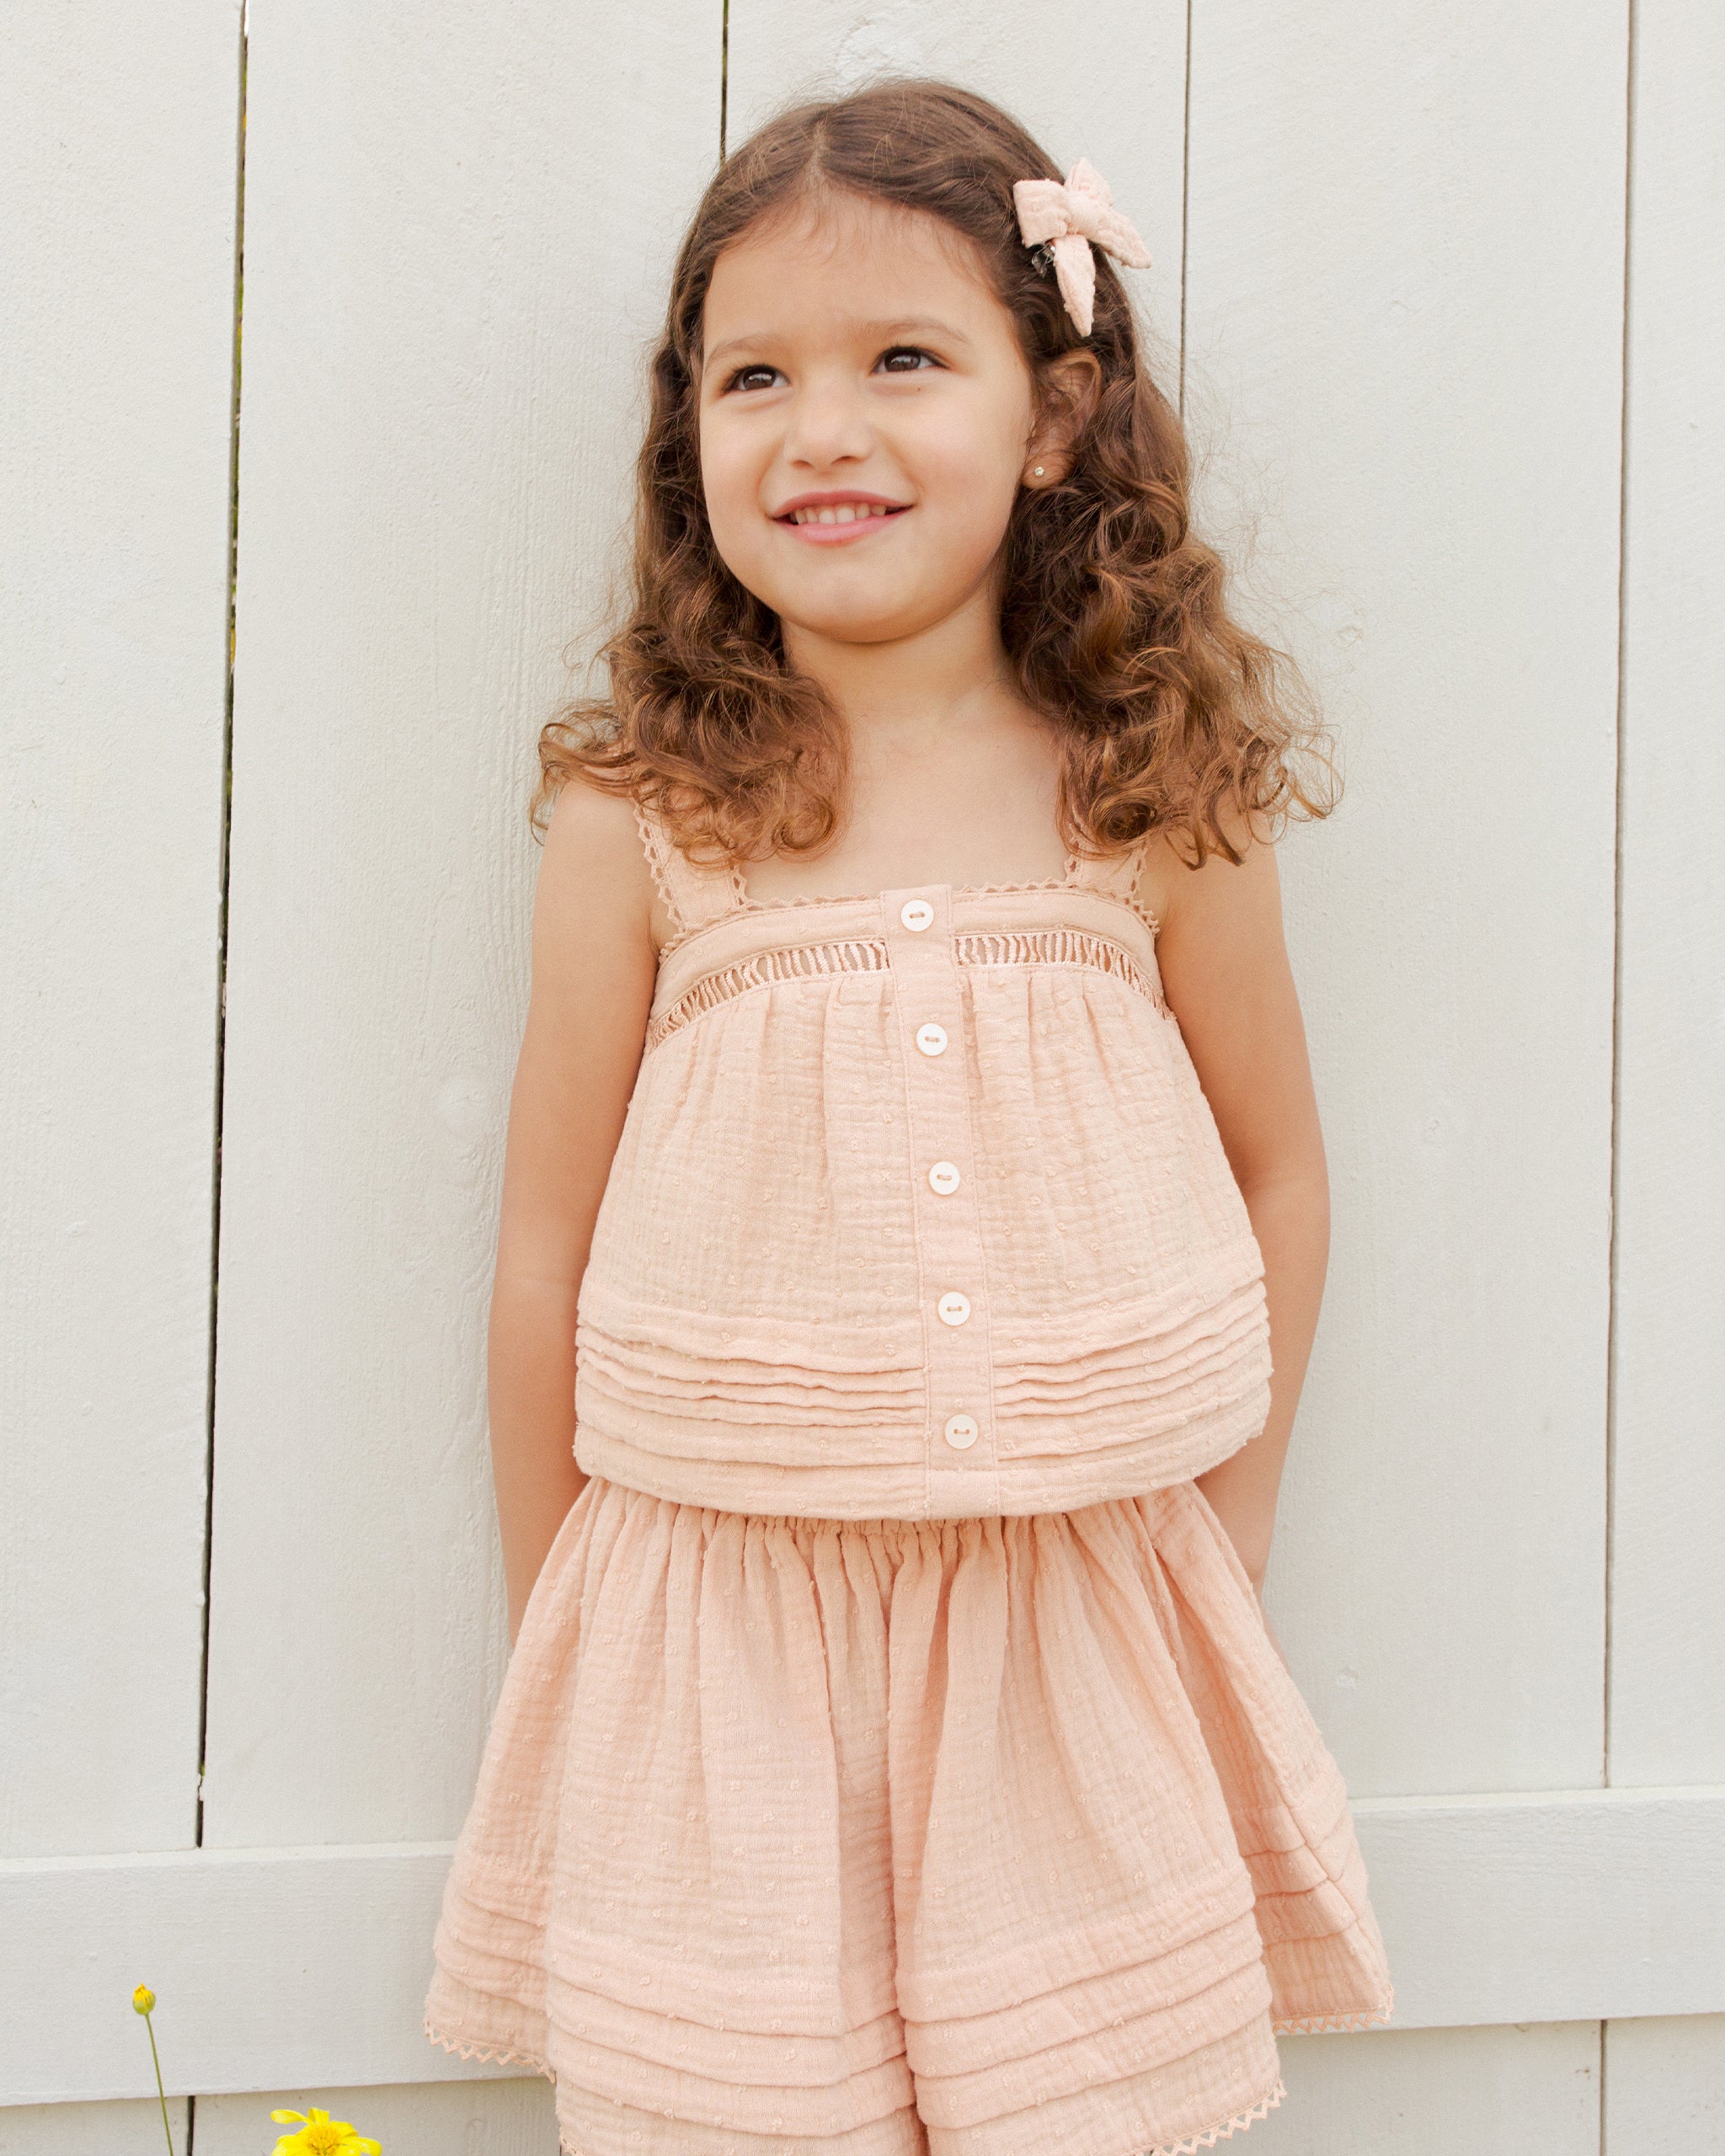 Pleat Tank || Apricot - Rylee + Cru | Kids Clothes | Trendy Baby Clothes | Modern Infant Outfits |